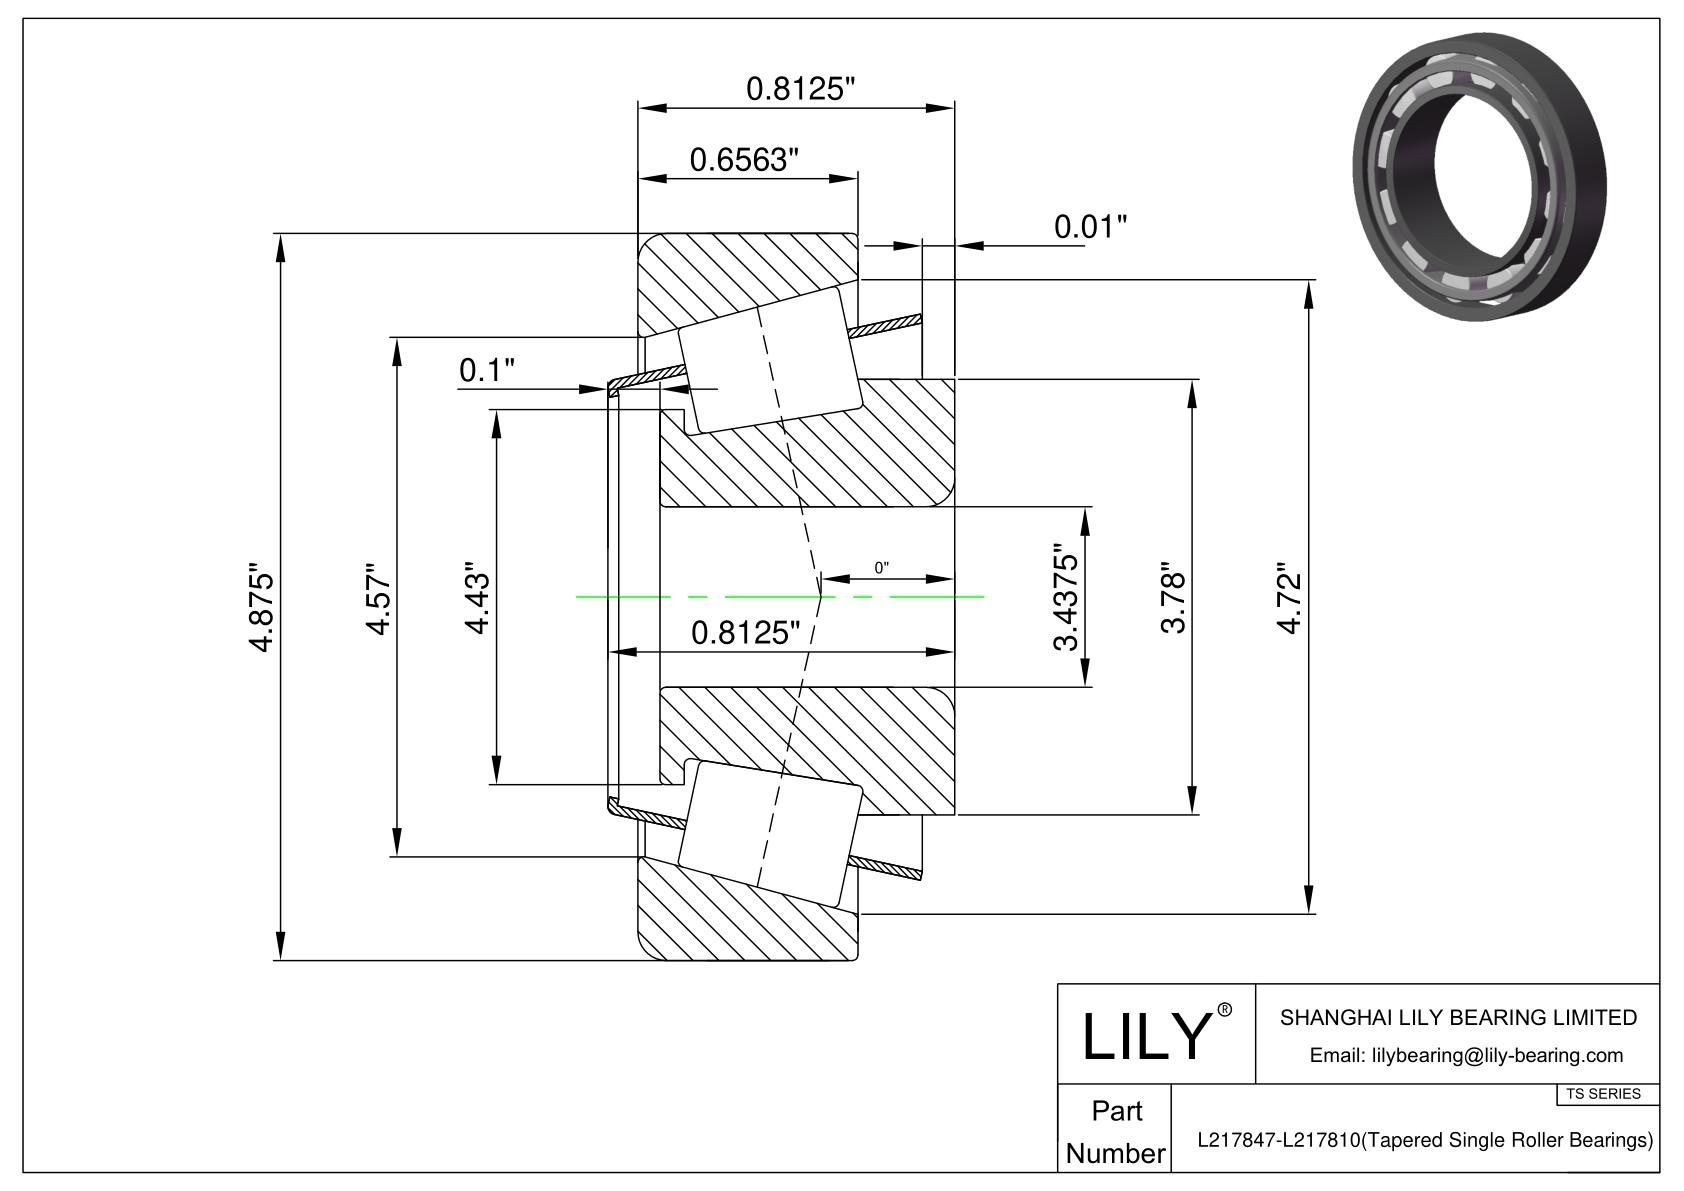 L217847-L217810 TS (Tapered Single Roller Bearings) (Imperial) cad drawing